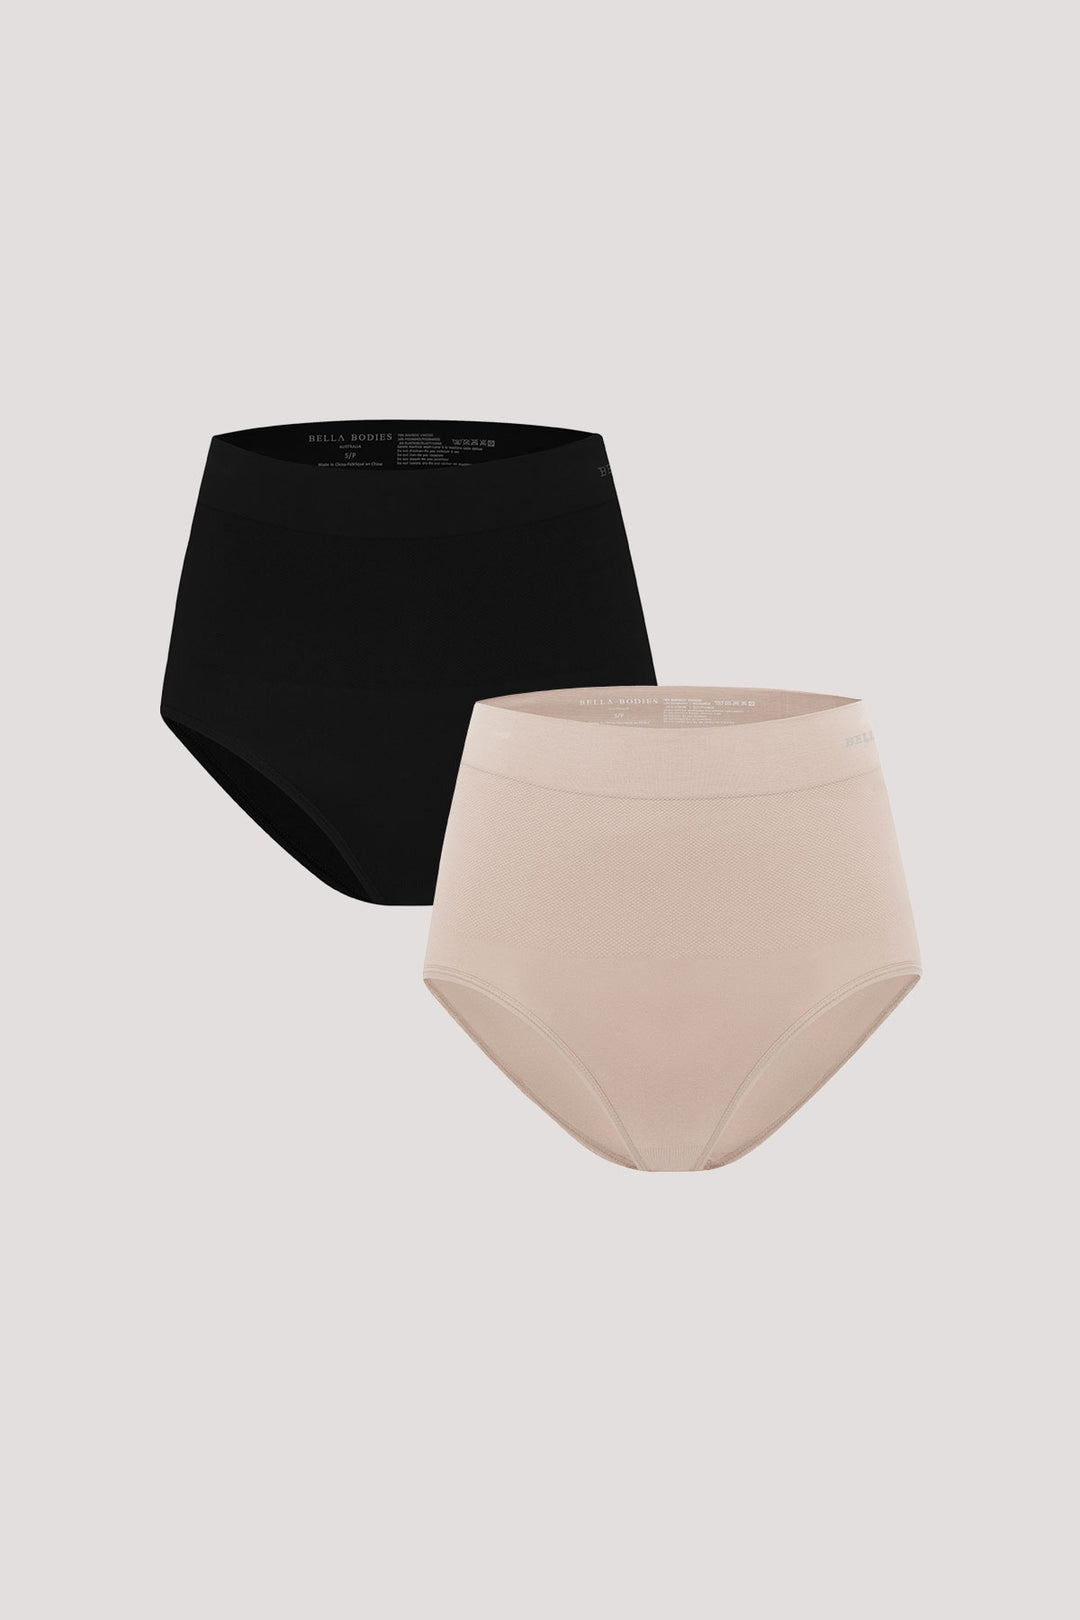 Women's breathable high waist control and firming underwear 2 pack | Bella Bodies Australia | Black and Sand